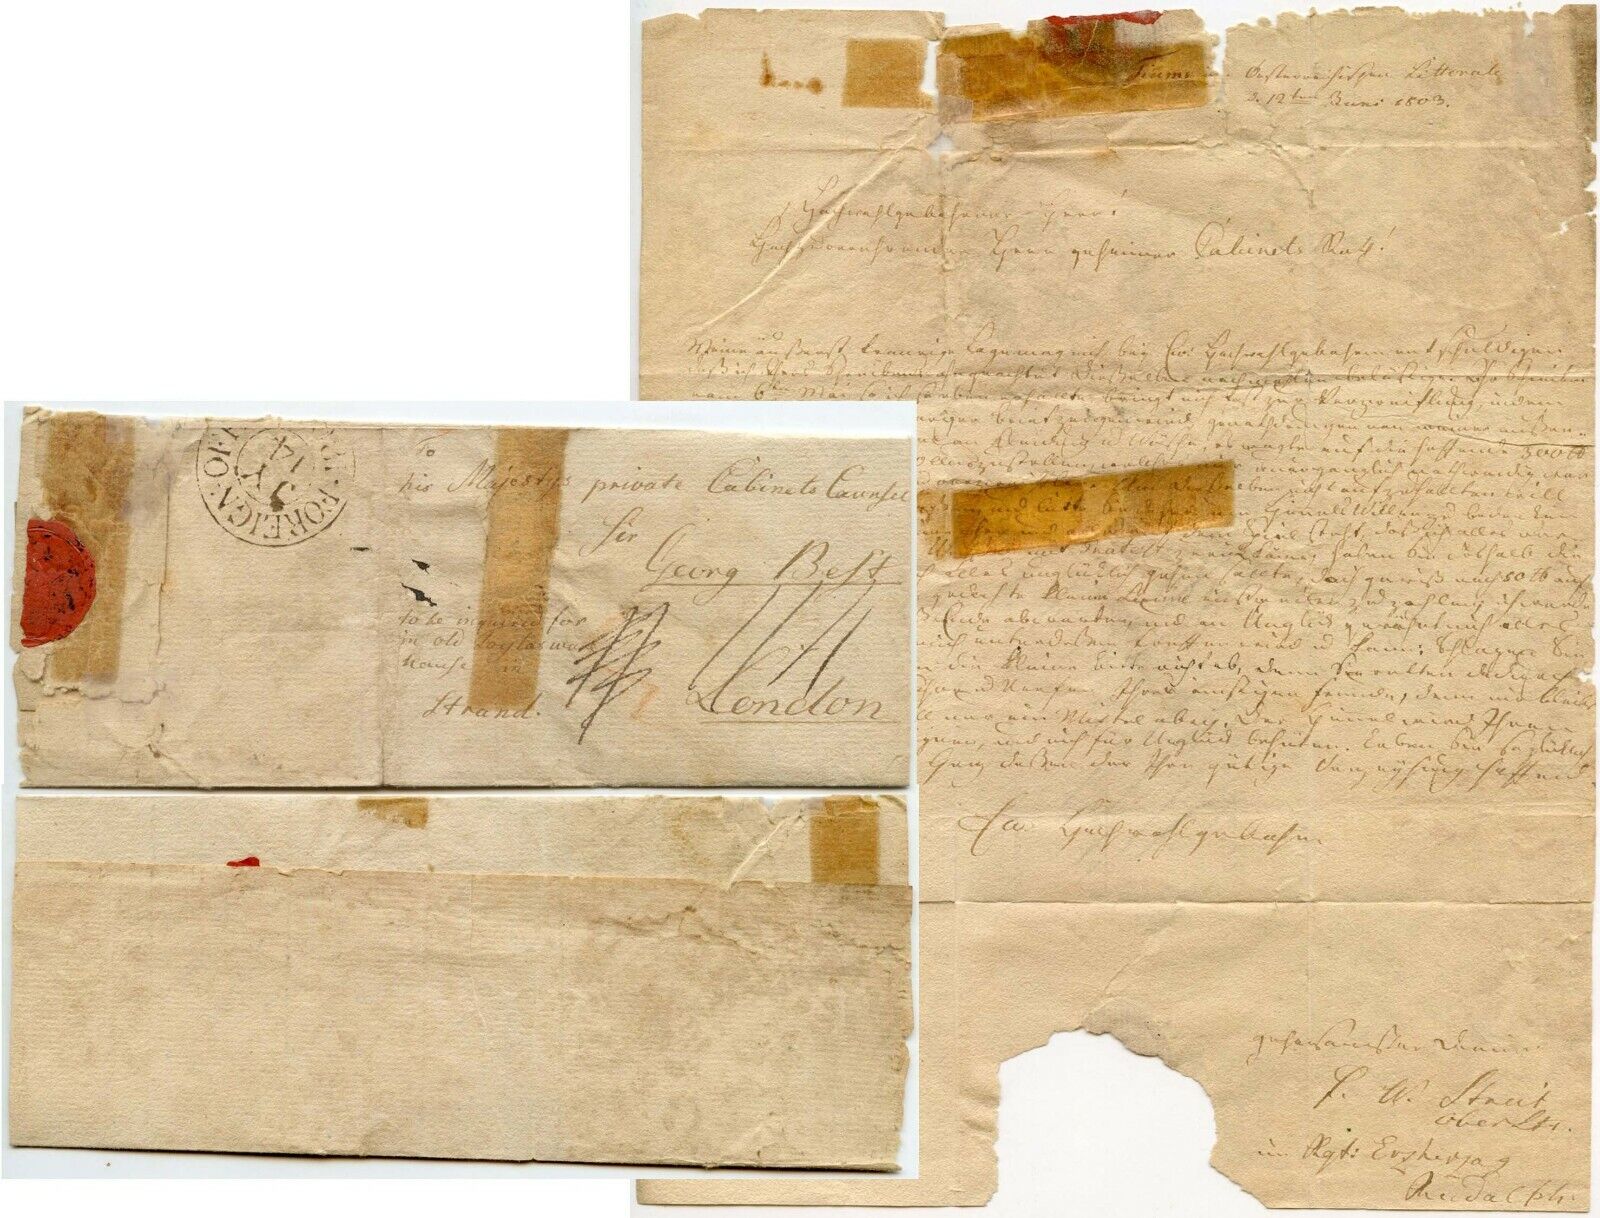 1803 LETTER to SIR GEORG BEST KINGS PRIVY COUNCIL from FIUME +FOREIGN OFFICE PMK